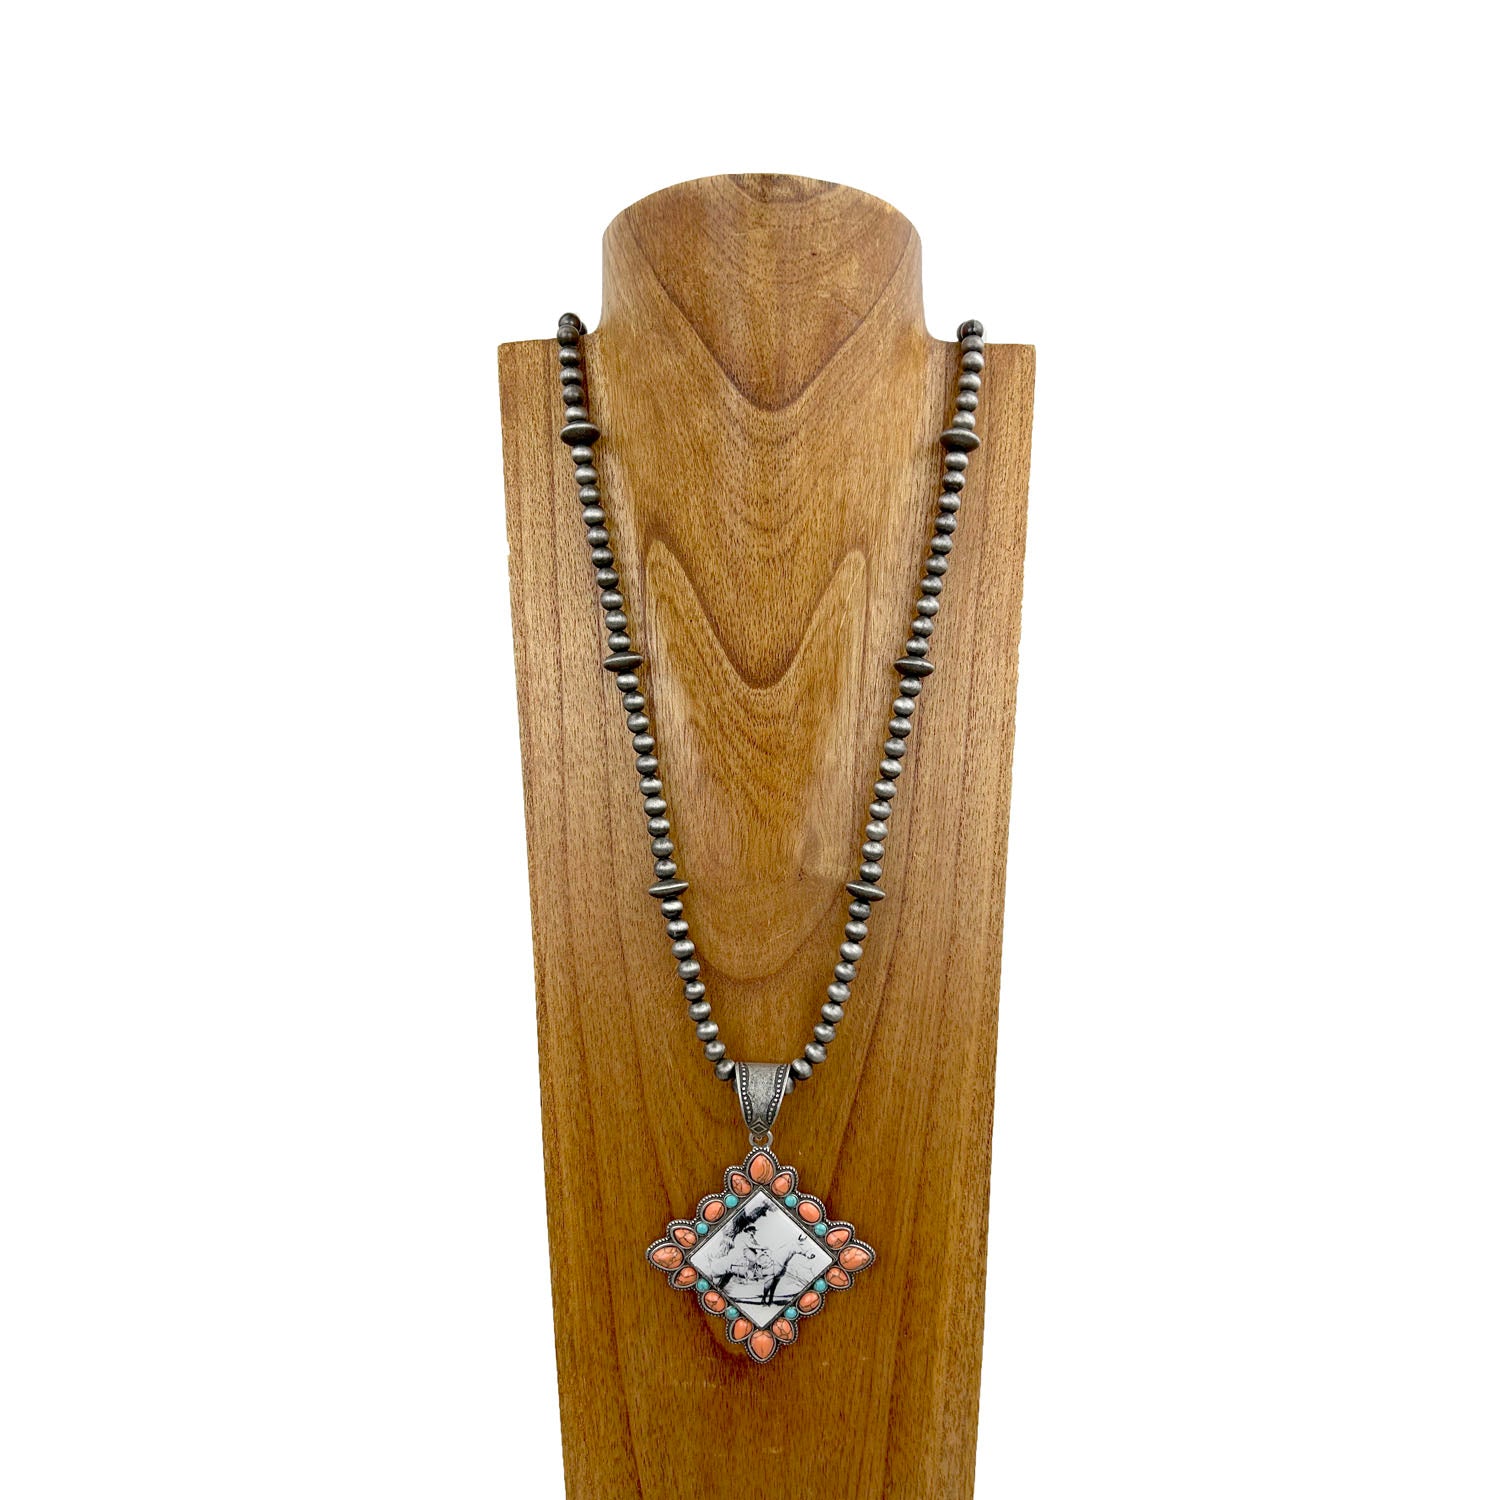 NKS230708-30	36 Inches long silver Navajo pearl beads with muti stone square cowboy pendant Necklace